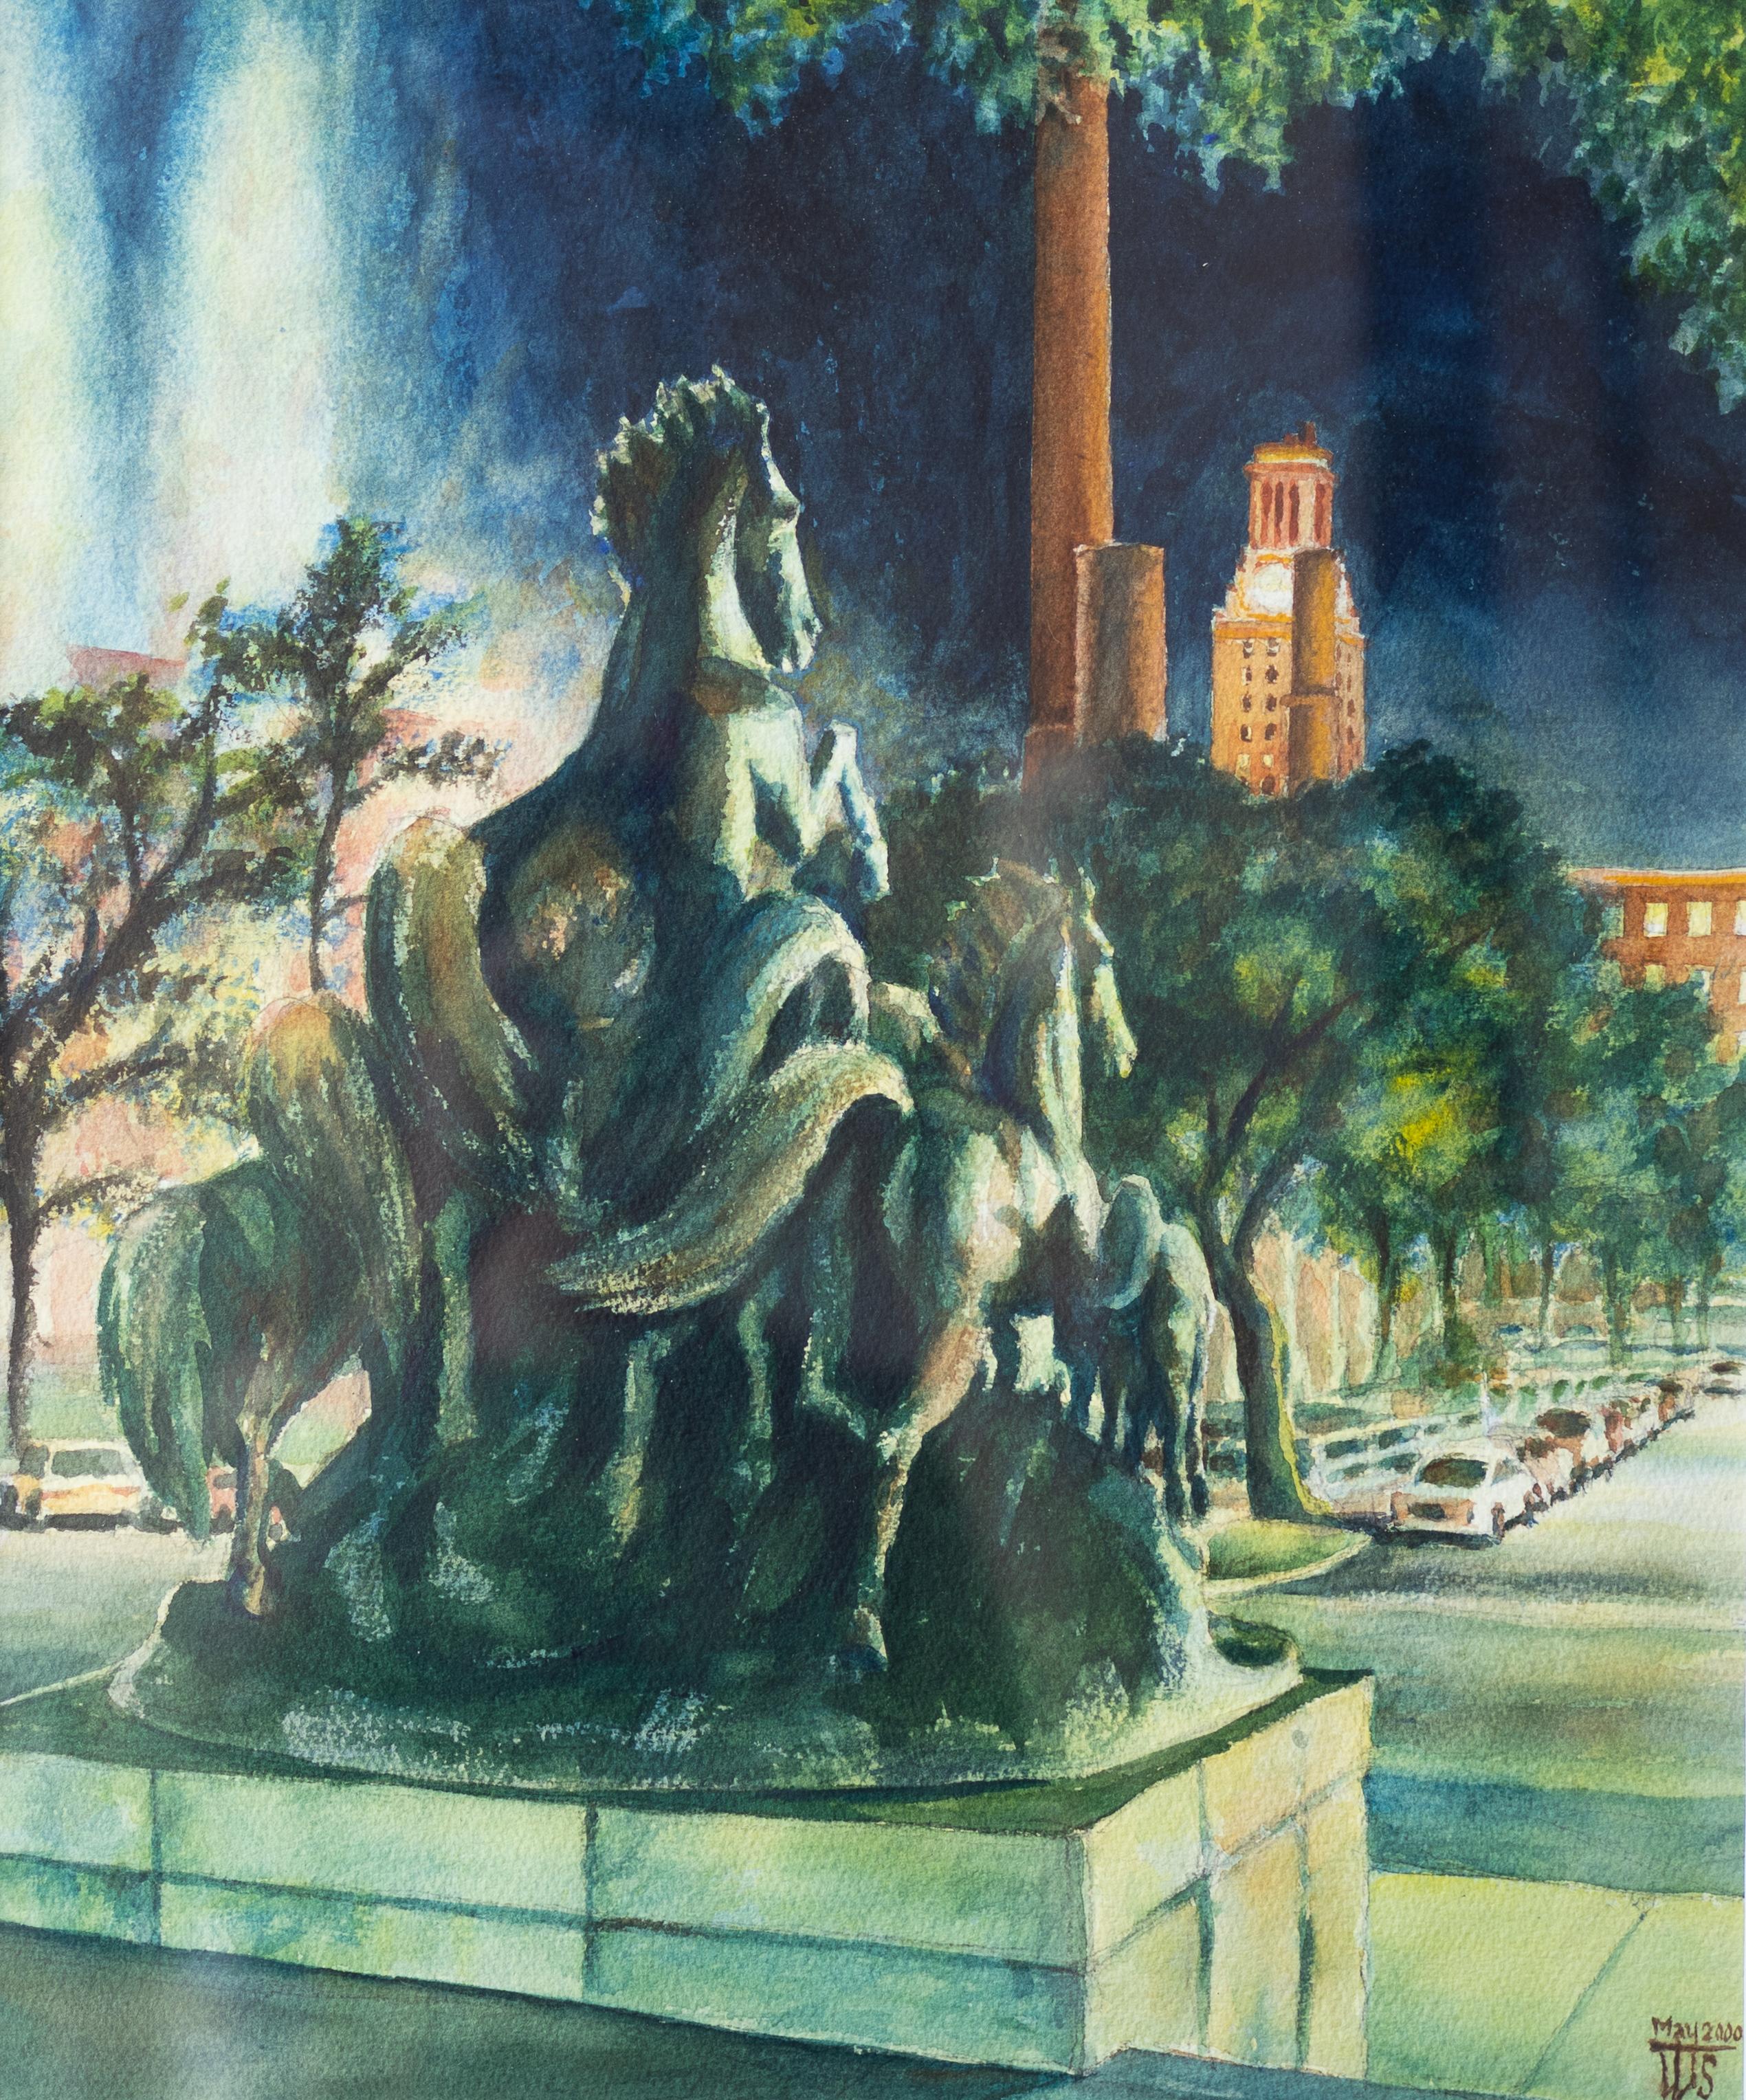 Tom Shefelman Landscape Art - "Mustangs Arise" Scene with Tower at University of Texas at Austin